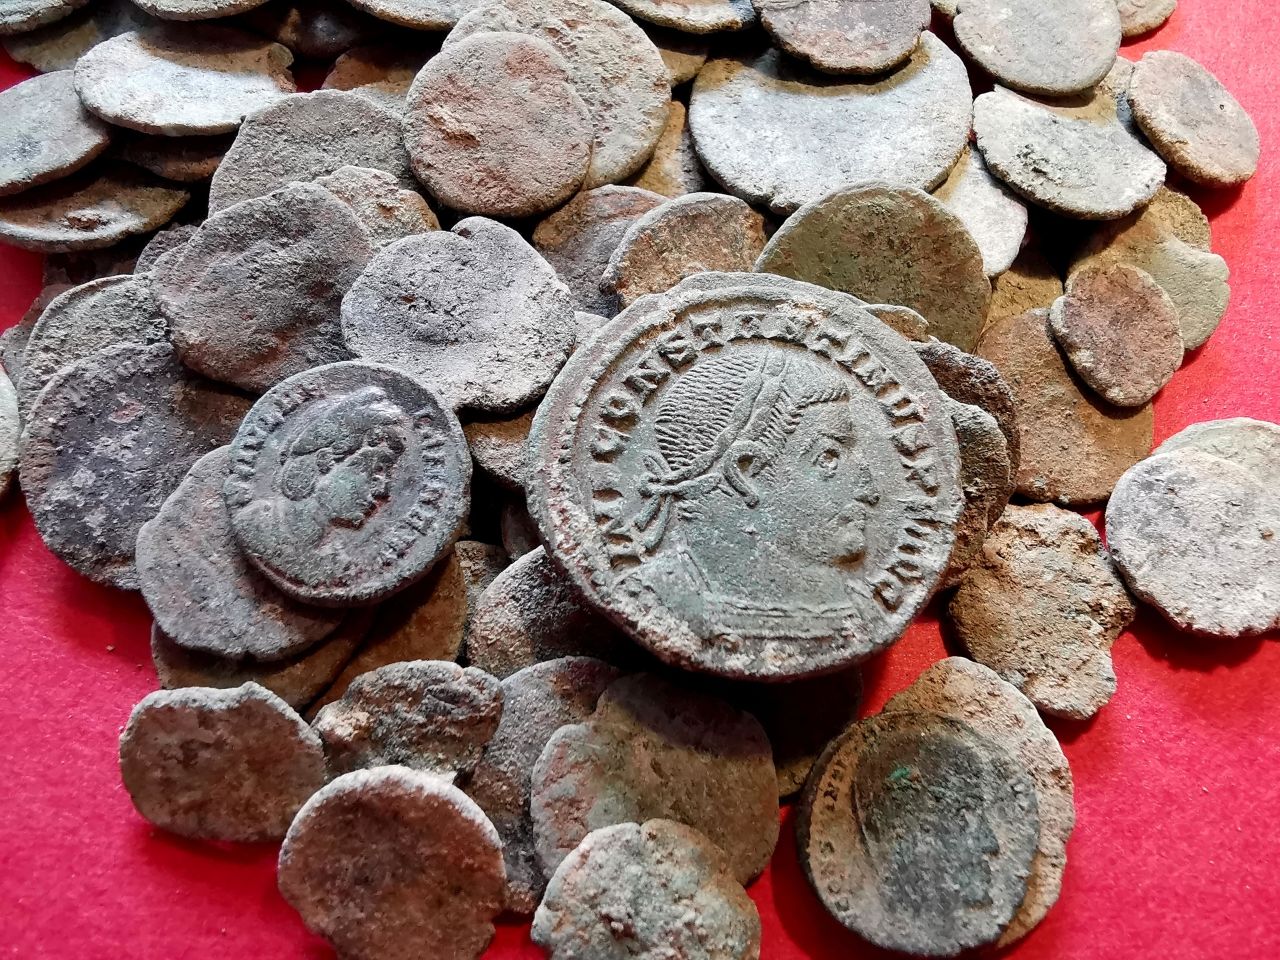 The coins were probably hidden by people fleeing barbarians, archaeologists say.